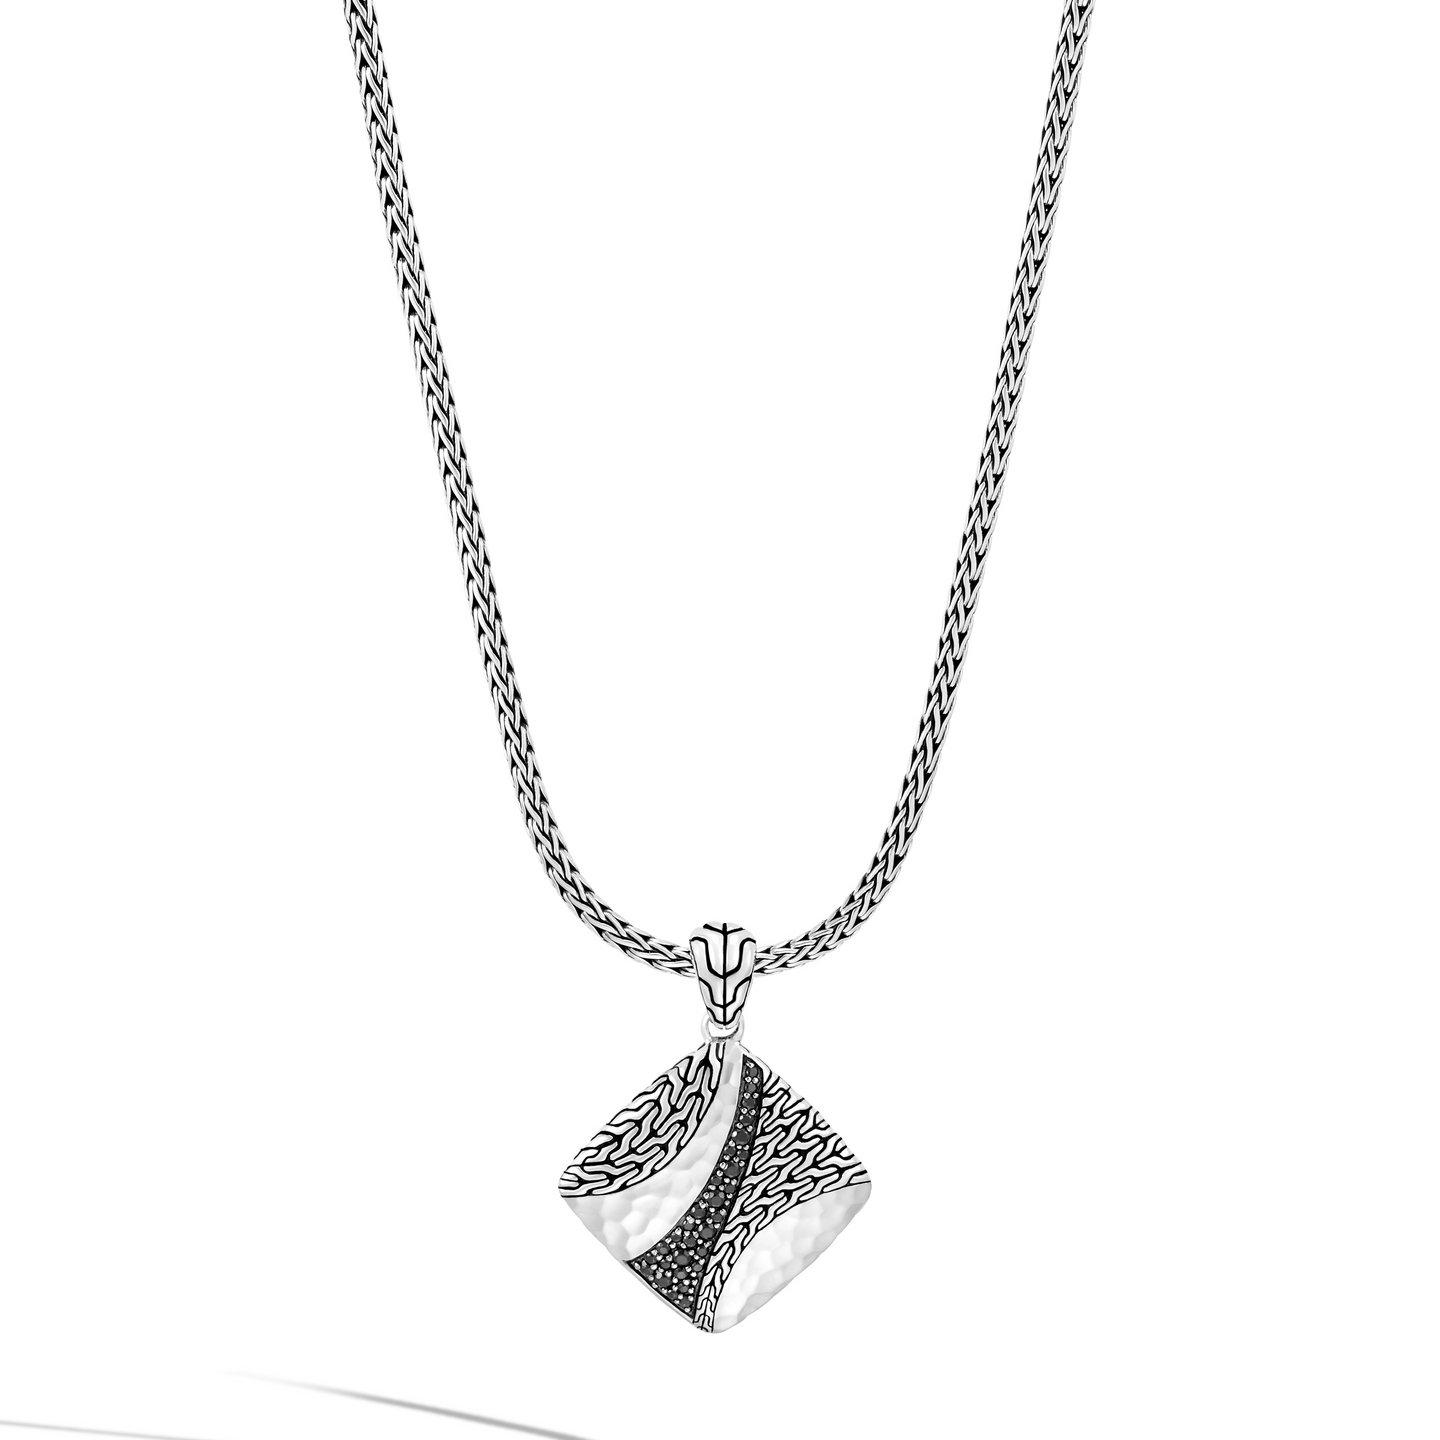 John Hardy Classic Chain Hammered Square Pendant Necklace, 18-20